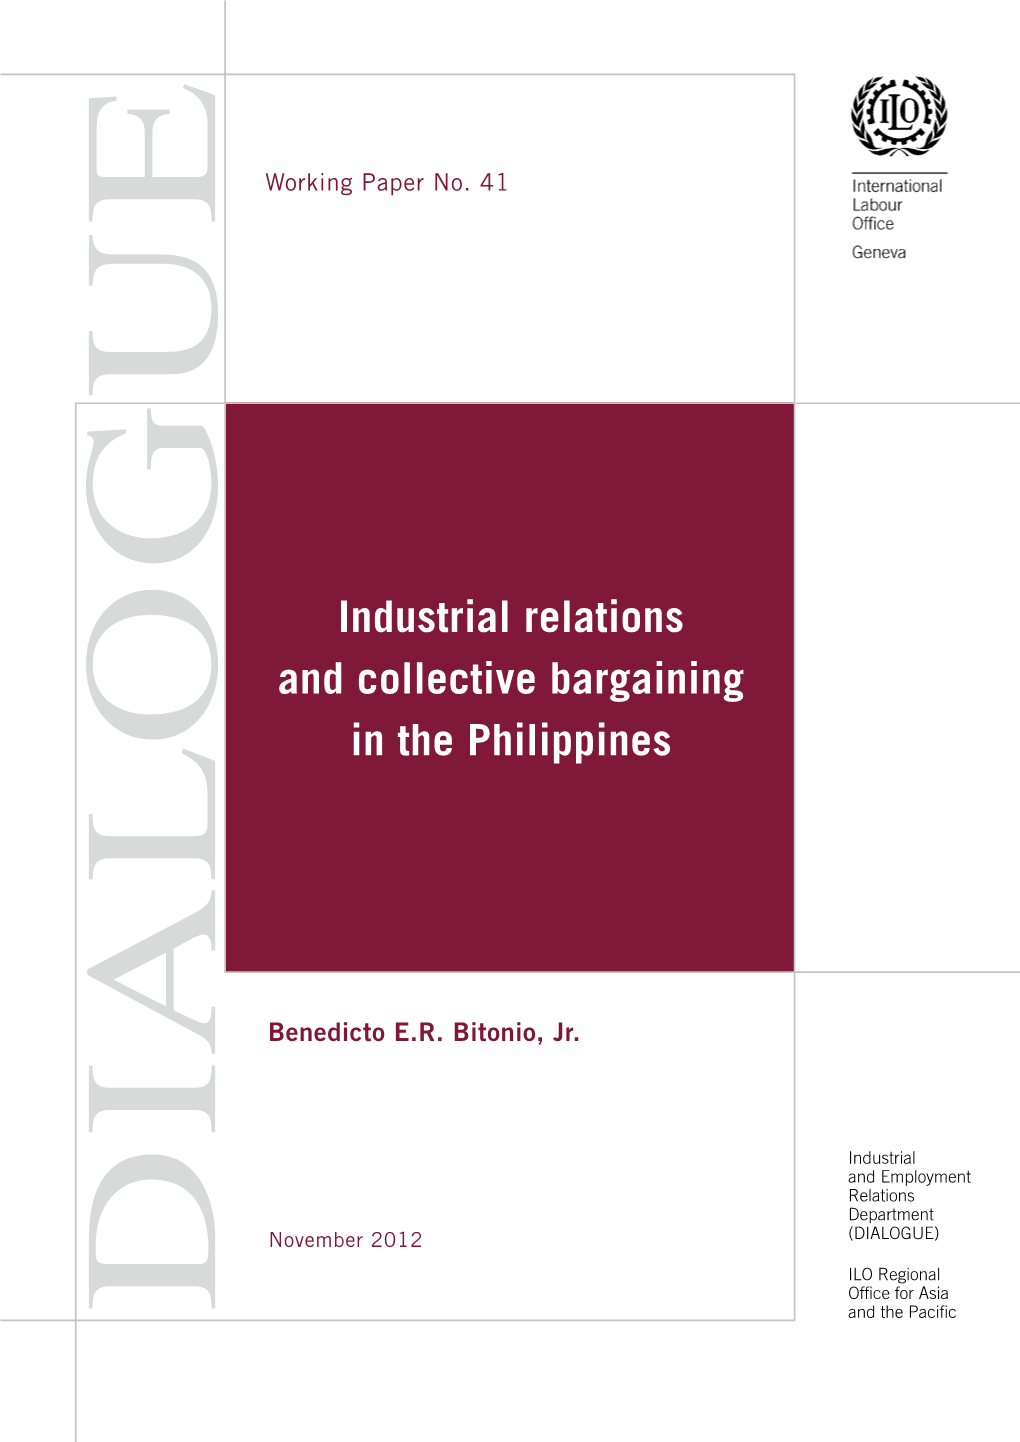 Industrial Relations and Collective Bargaining in the Philippines